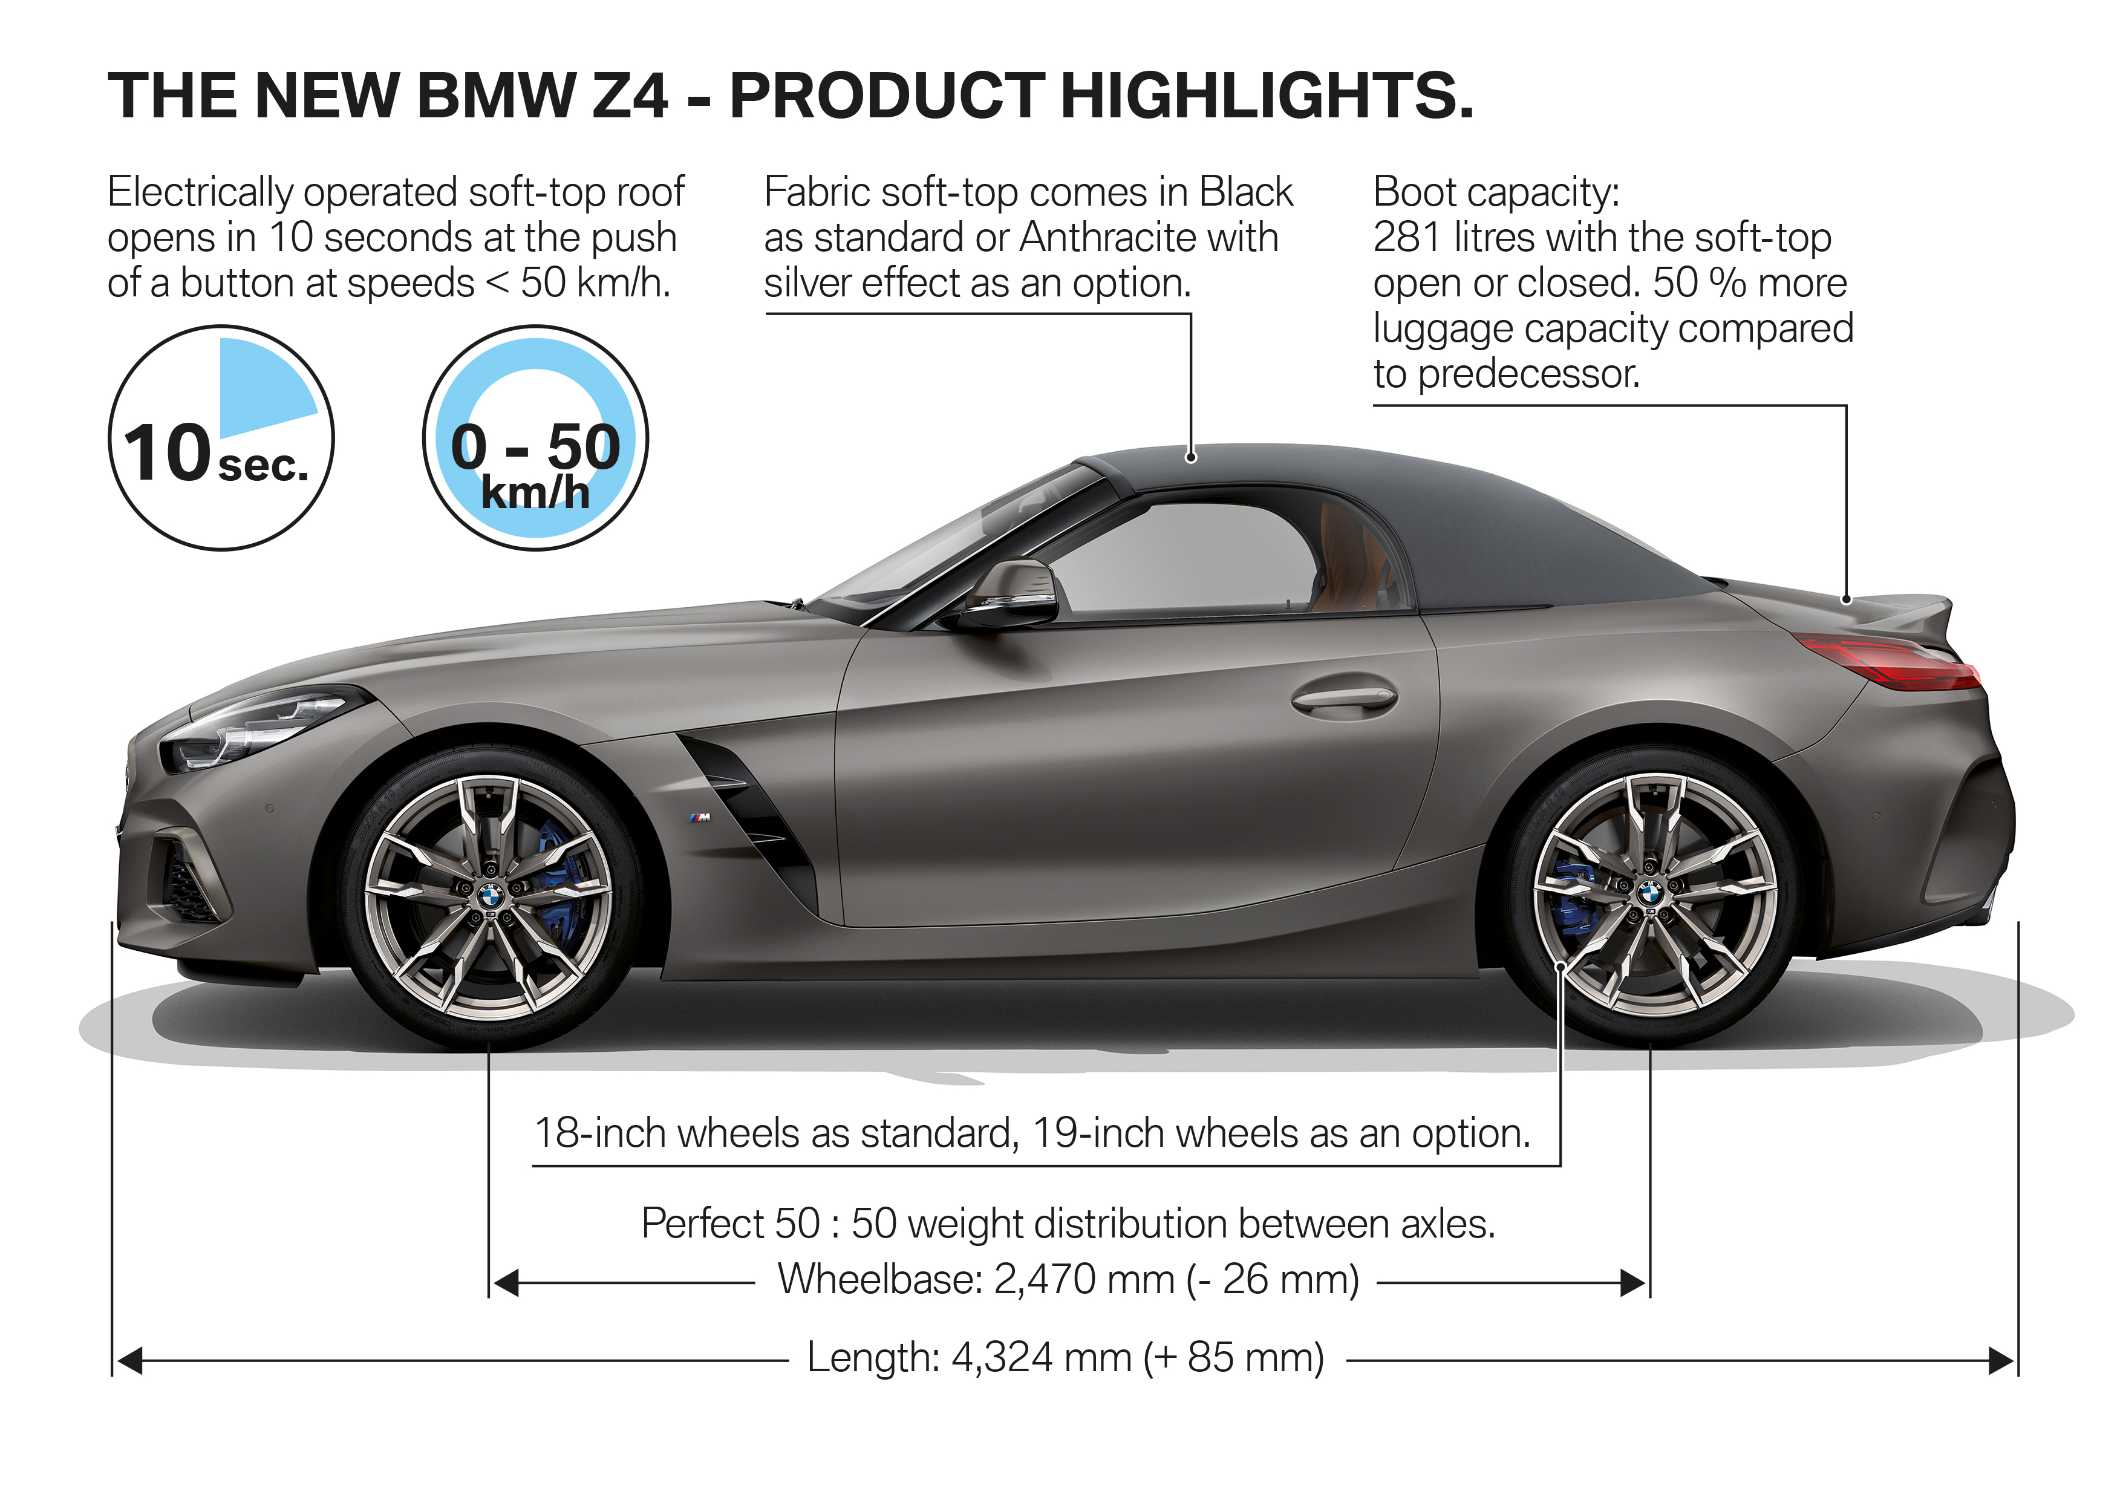 The new BMW Z4 - Product Highlights (09/2018).